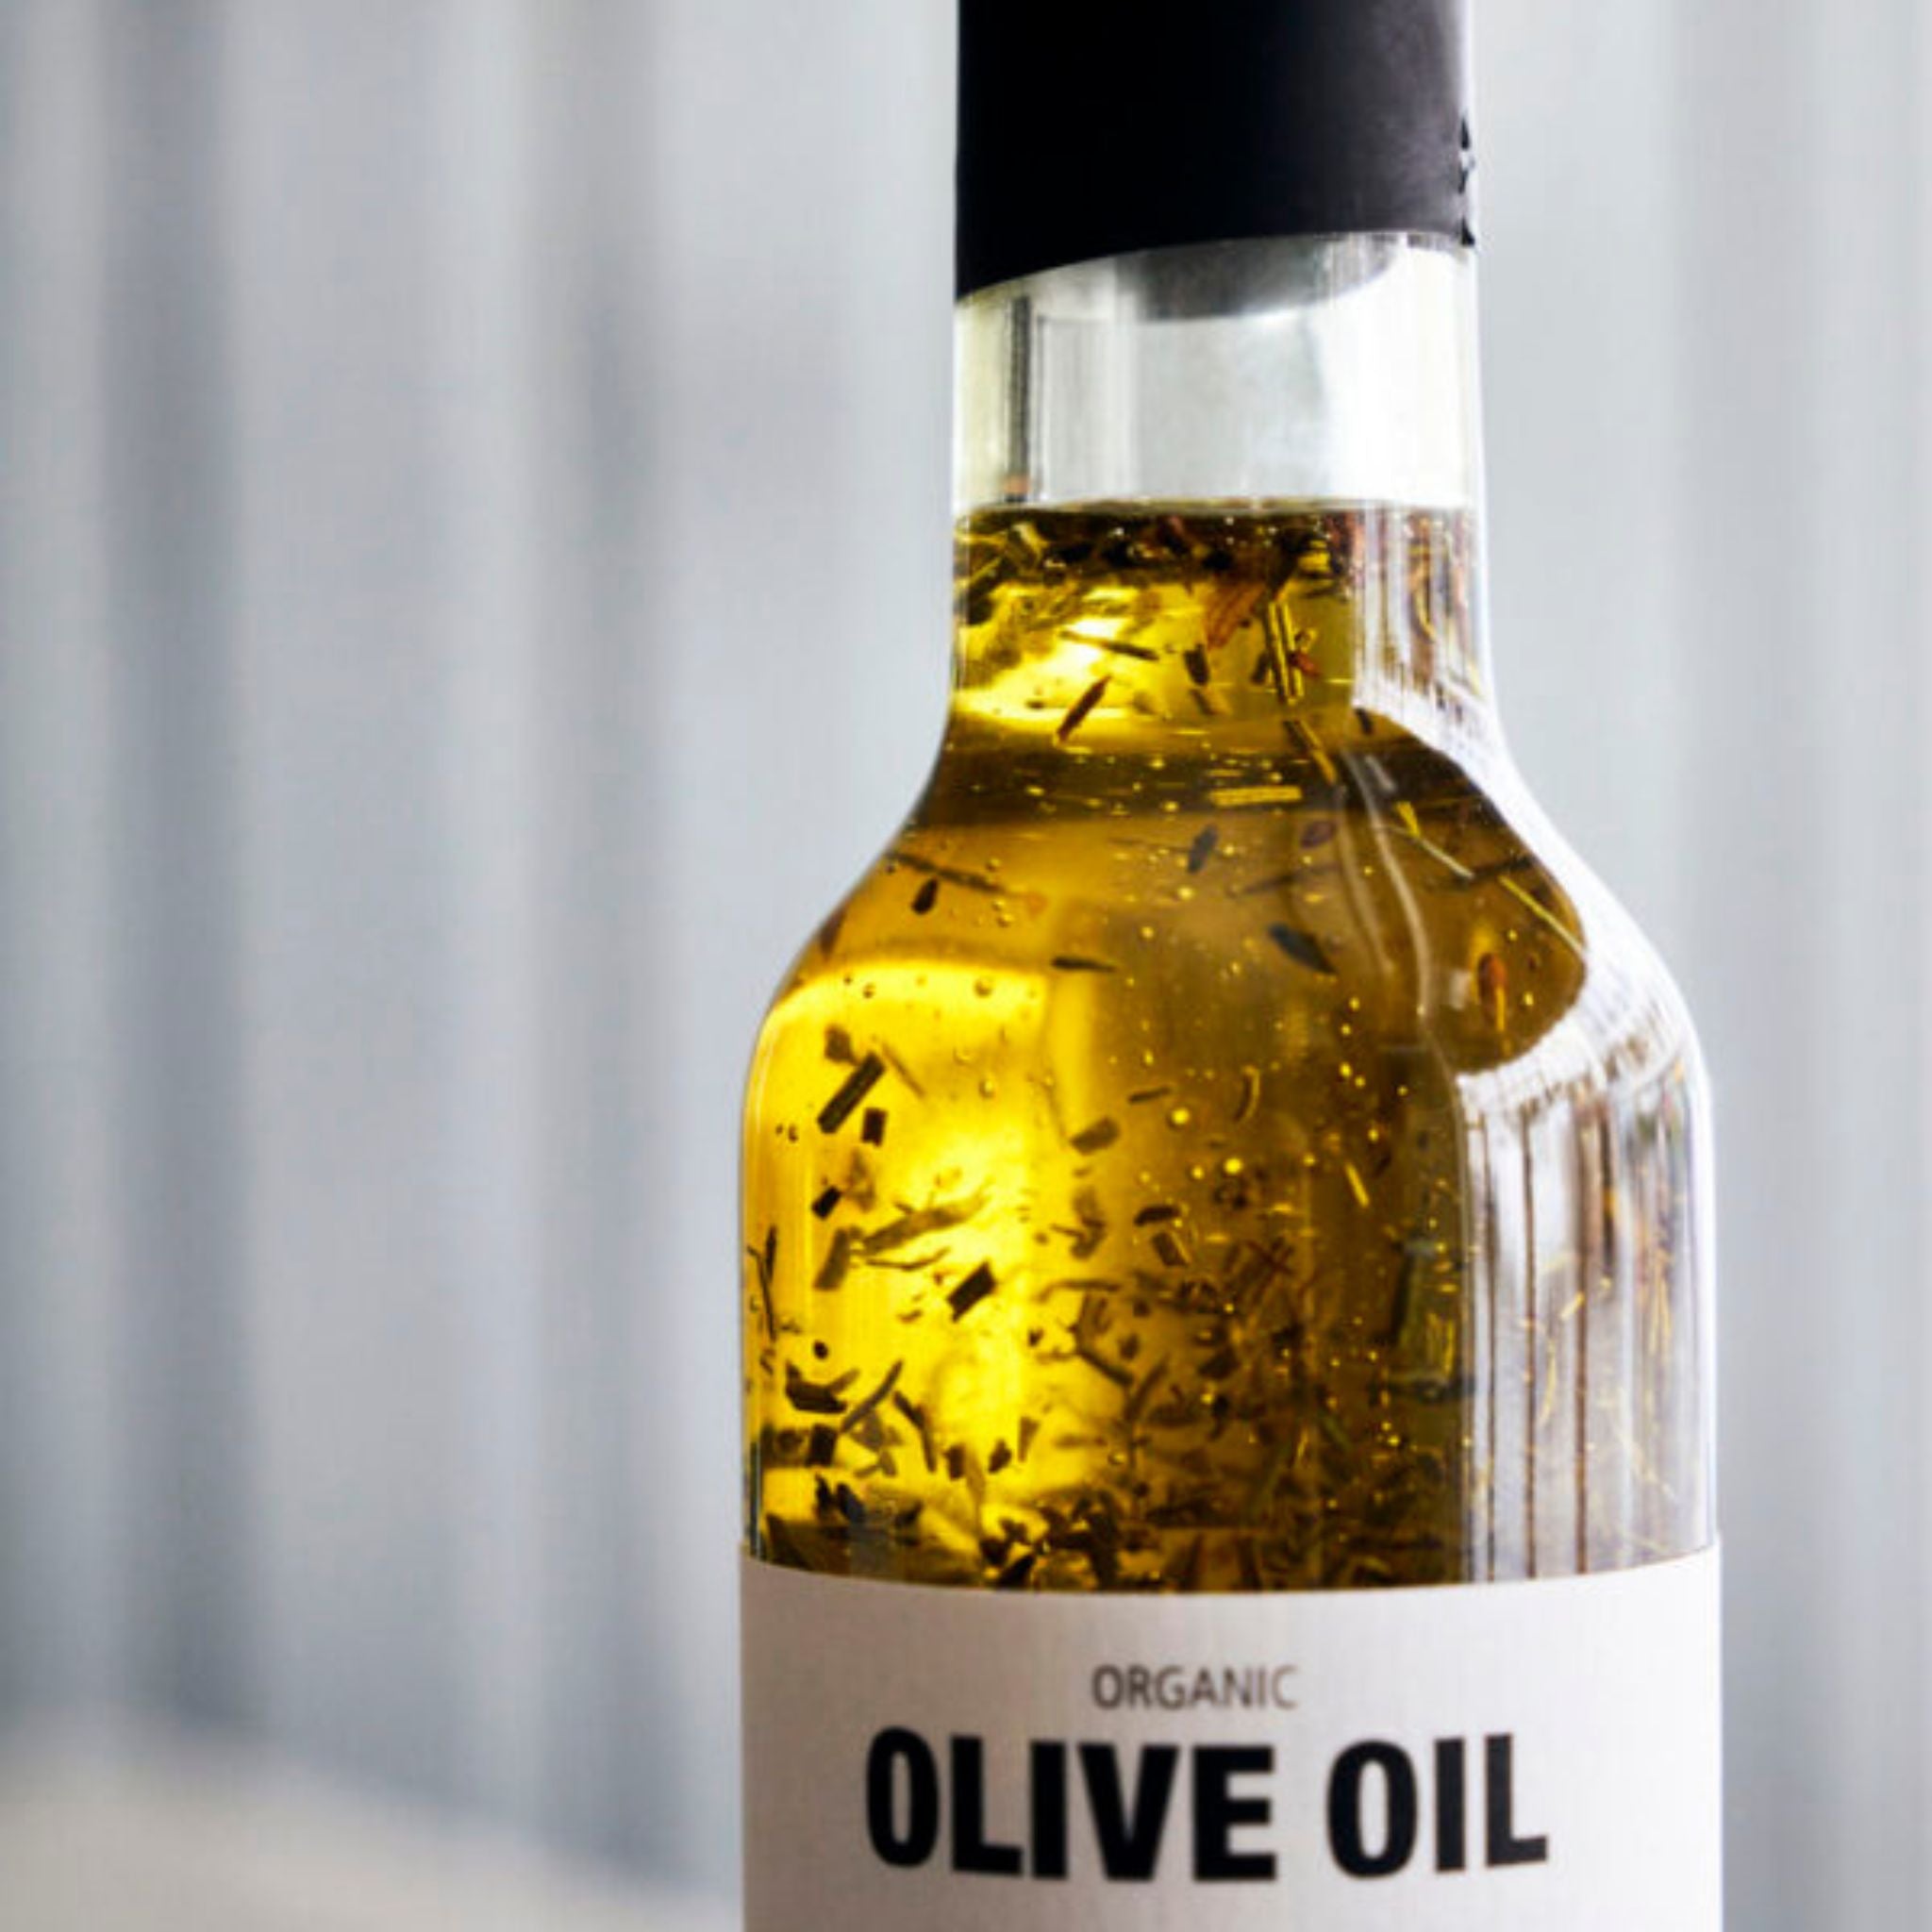 Simply Elevated - Try this 100% extra virgin olive oil with lemon to add a fresh edge to your cooking. The aromatic flavor brings out the best in a delicious salad. We recommend that you use this oil for fish and shellfish as well as dressings and marinades.